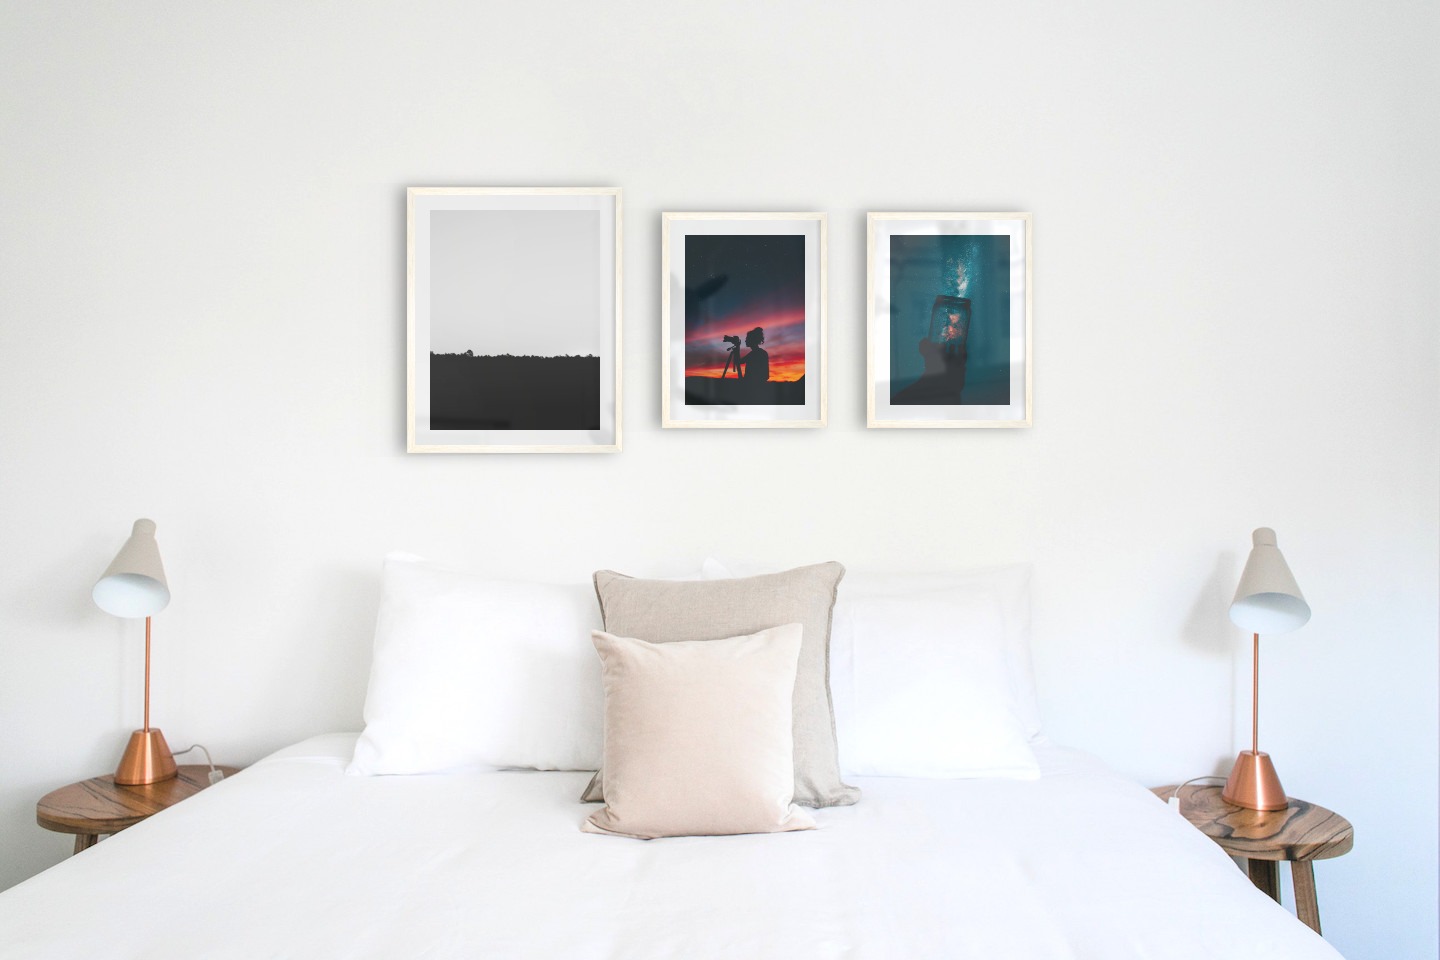 Gallery wall with picture frames in light wood in sizes 40x50 and 30x40 with prints "Sky above trees", "Photographer at night" and "Jar in front of space"